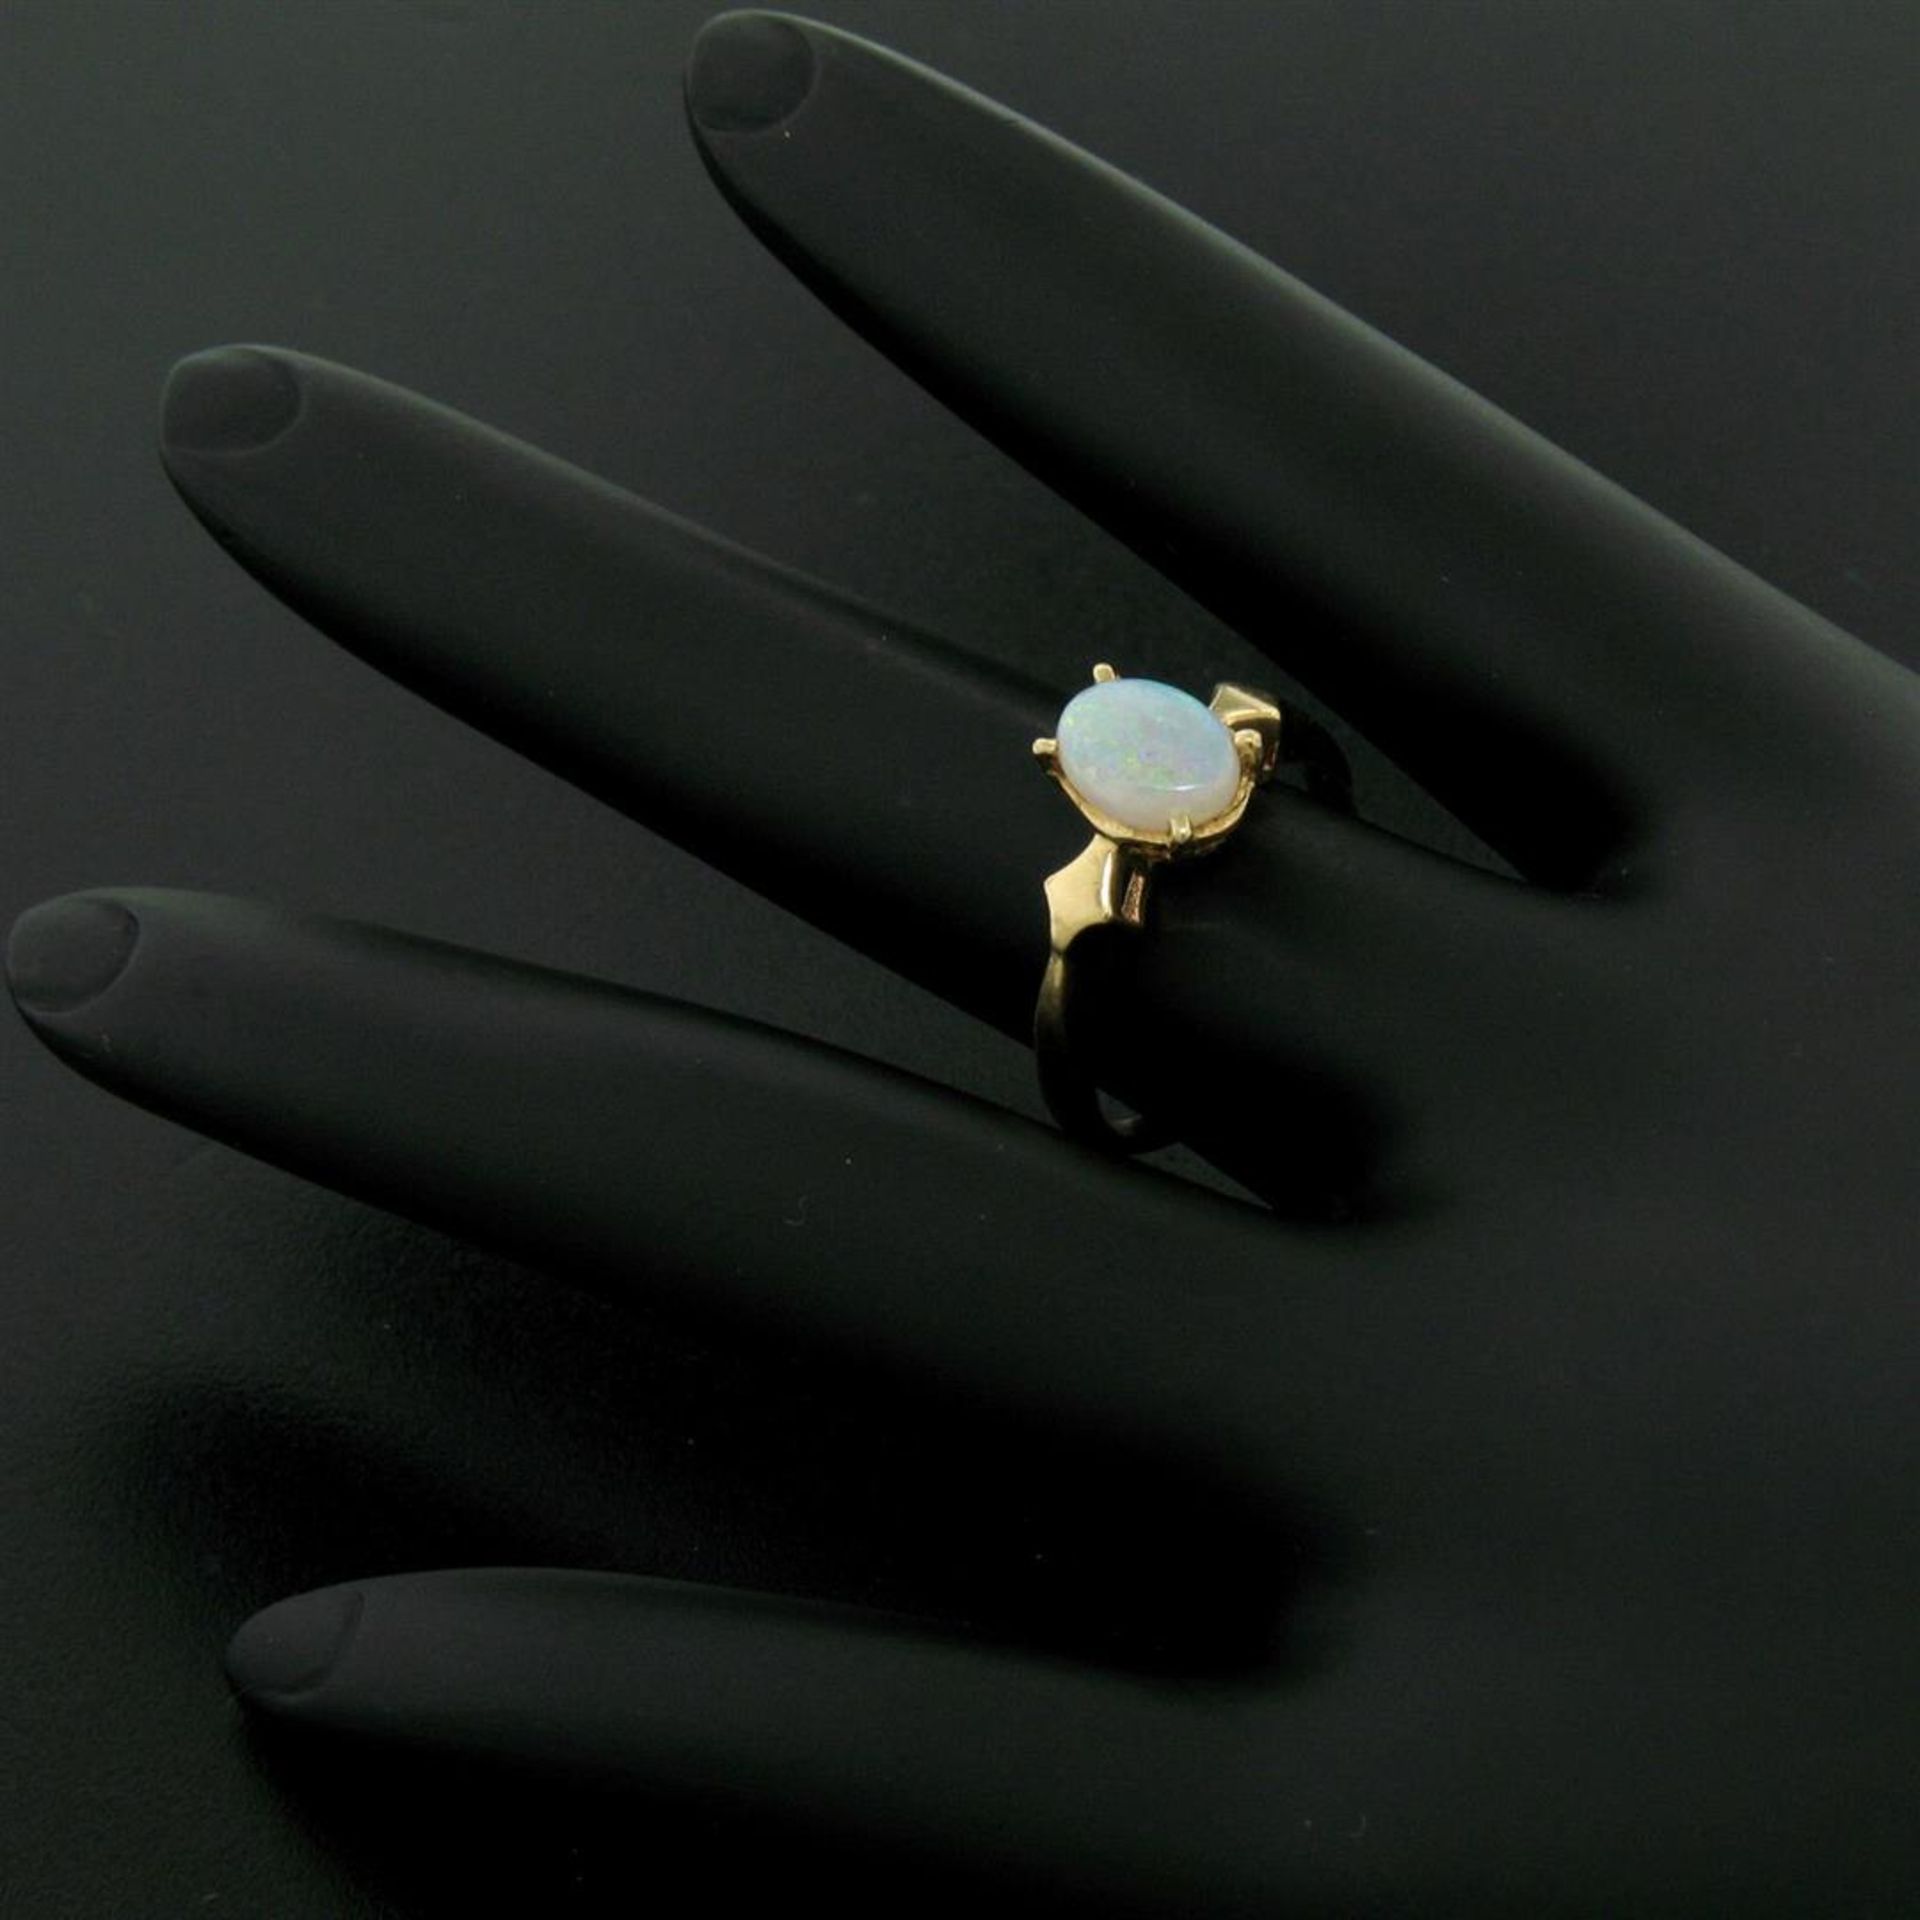 Vintage 14K Yellow Gold 0.65ct Petite Oval Cabochon Opal Solitaire Ring Size 6 - Image 9 of 9